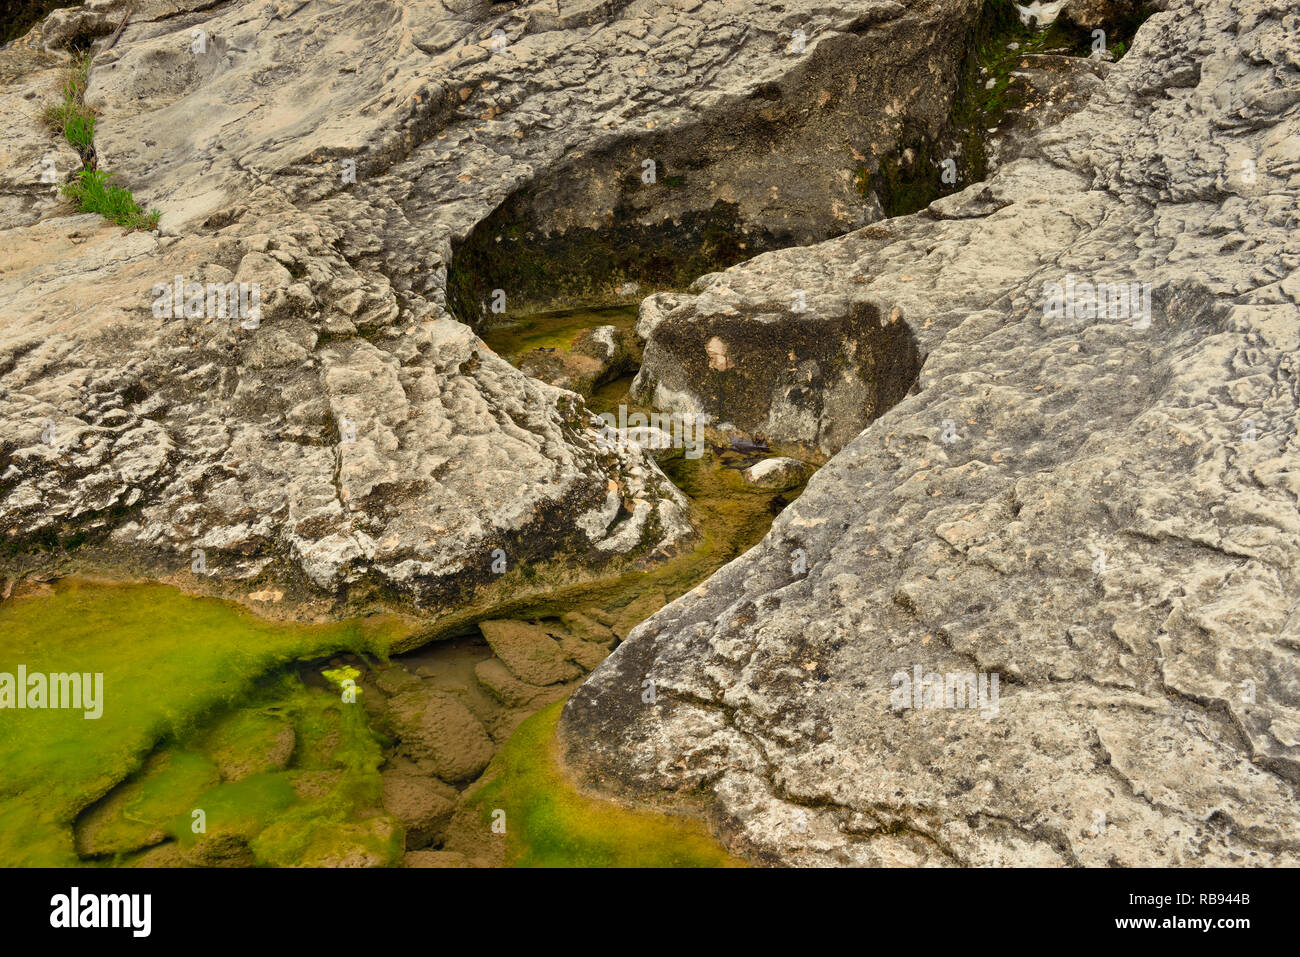 Rocks formations near the Pedernales River, Pedernales Falls State Park, Texas, USA Stock Photo